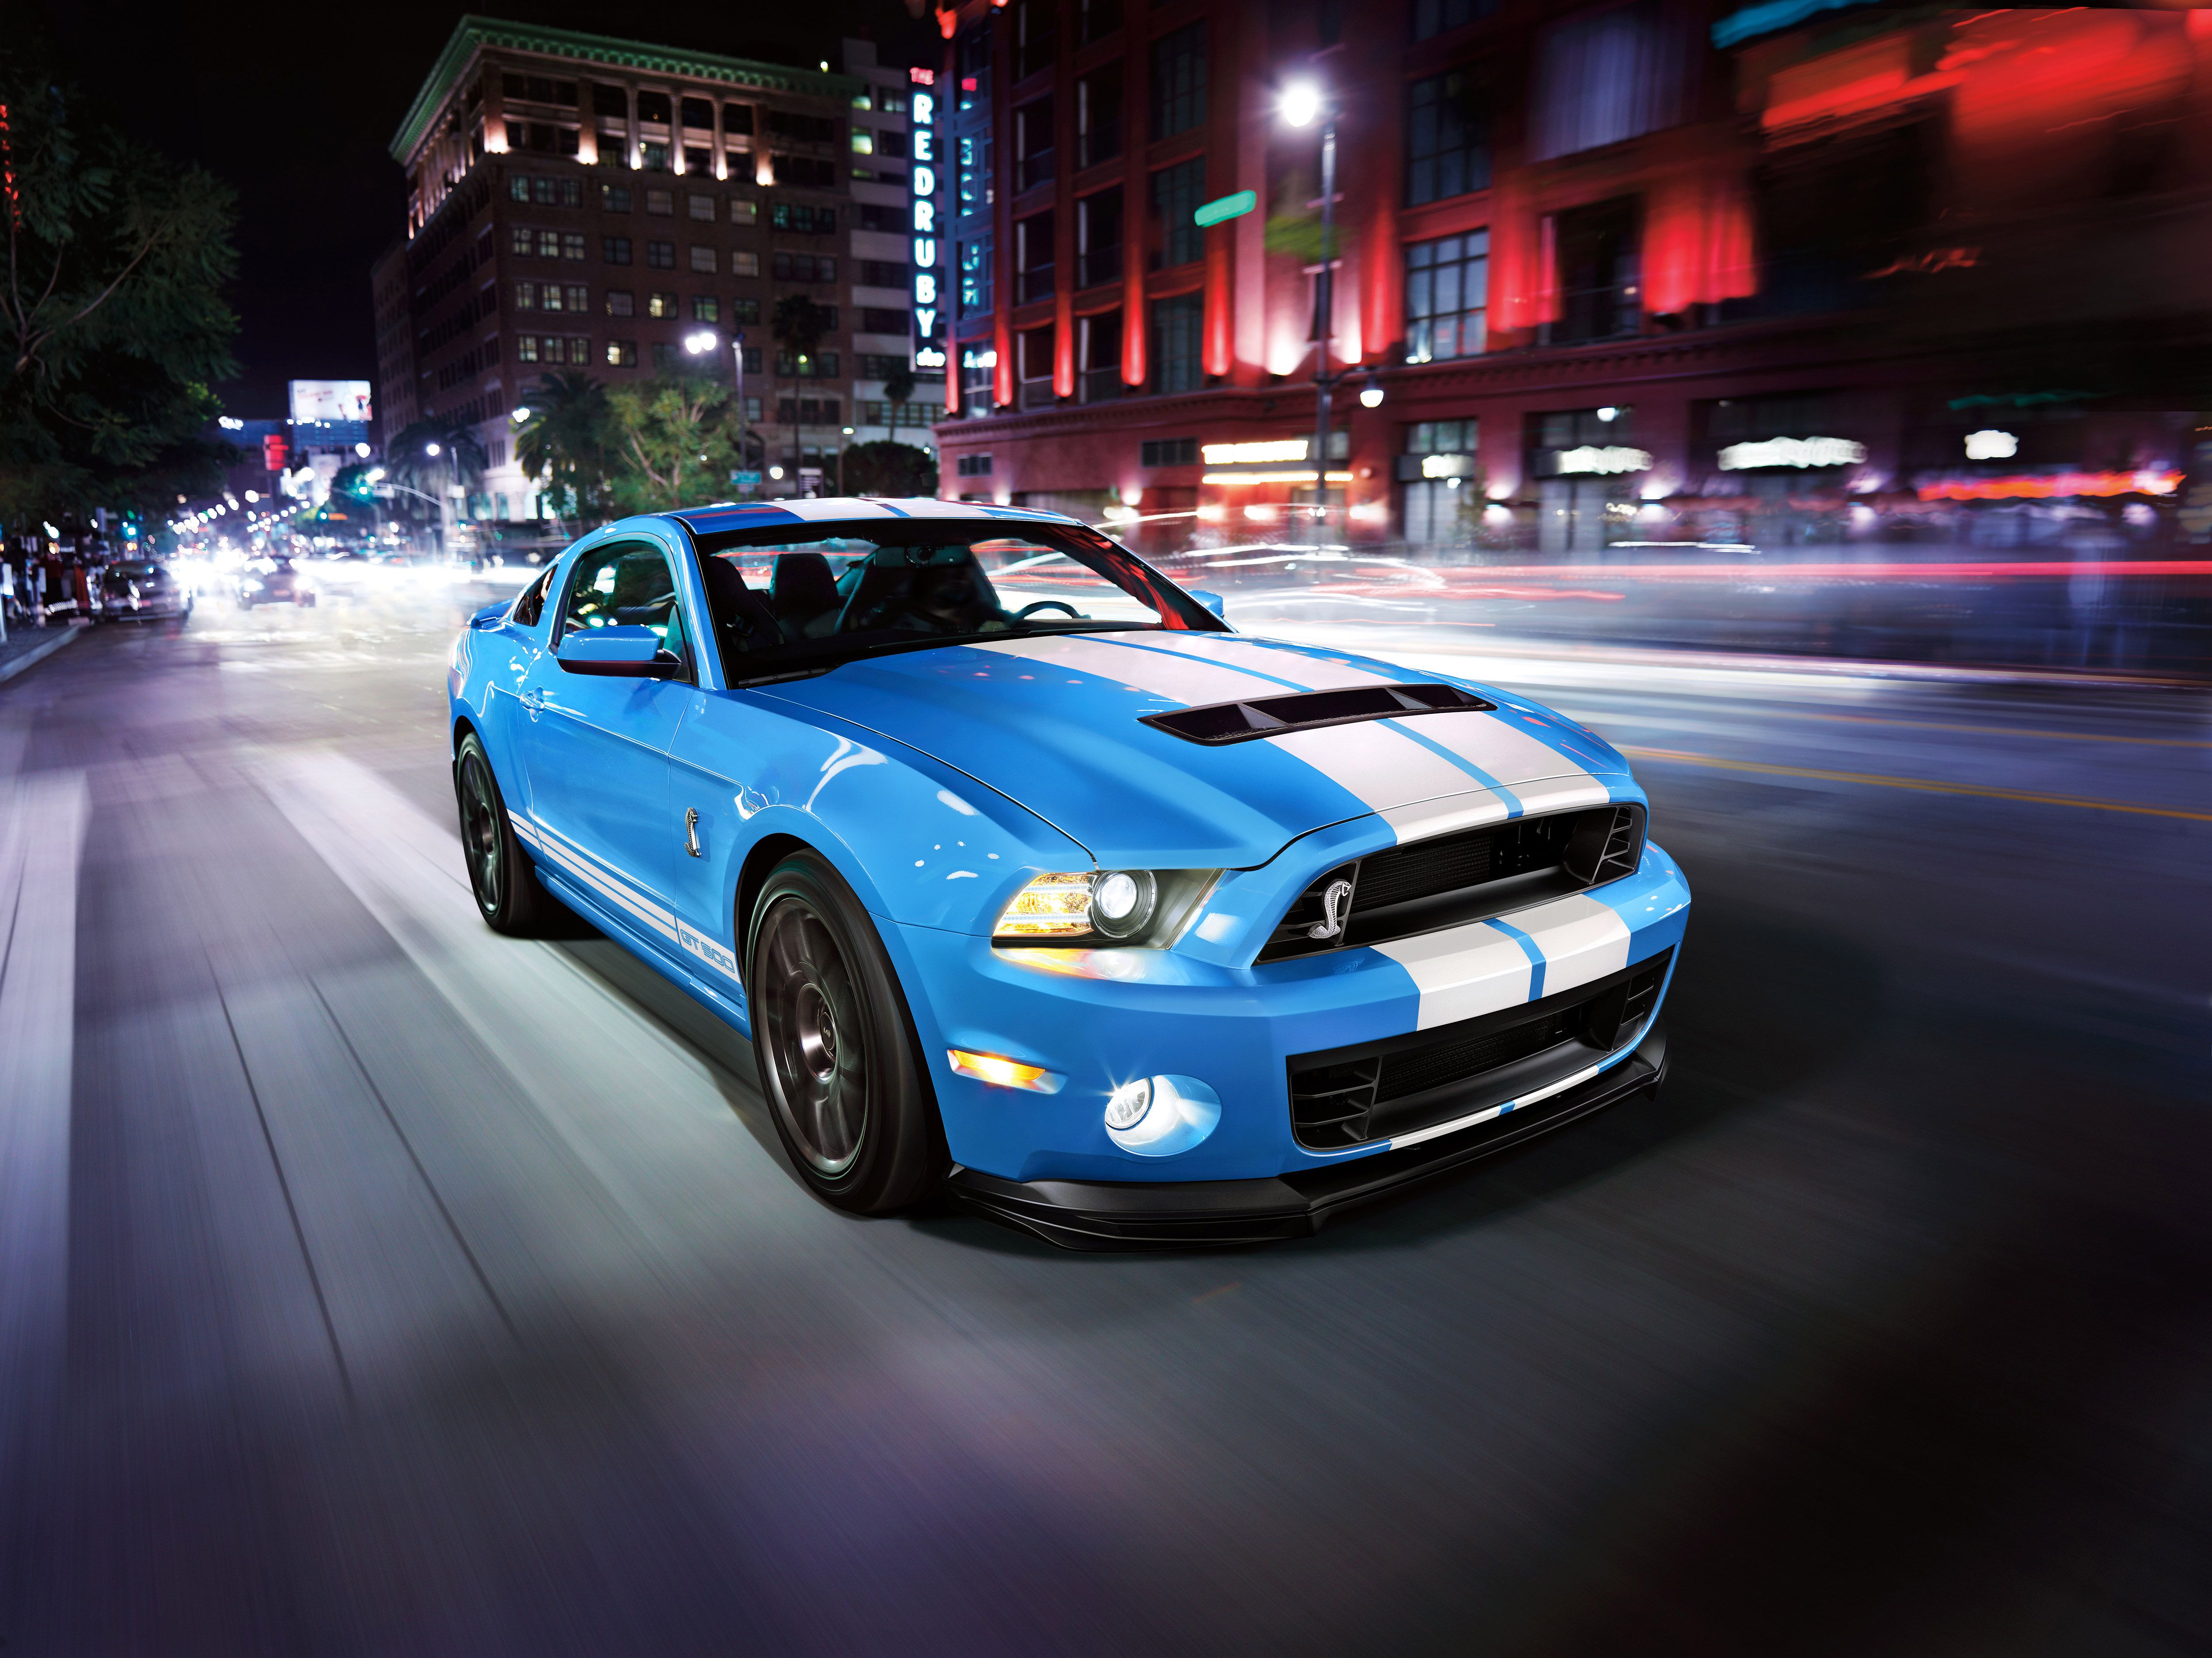 Ford Shelby GT500 on the Street 4K UHD Wallpaper